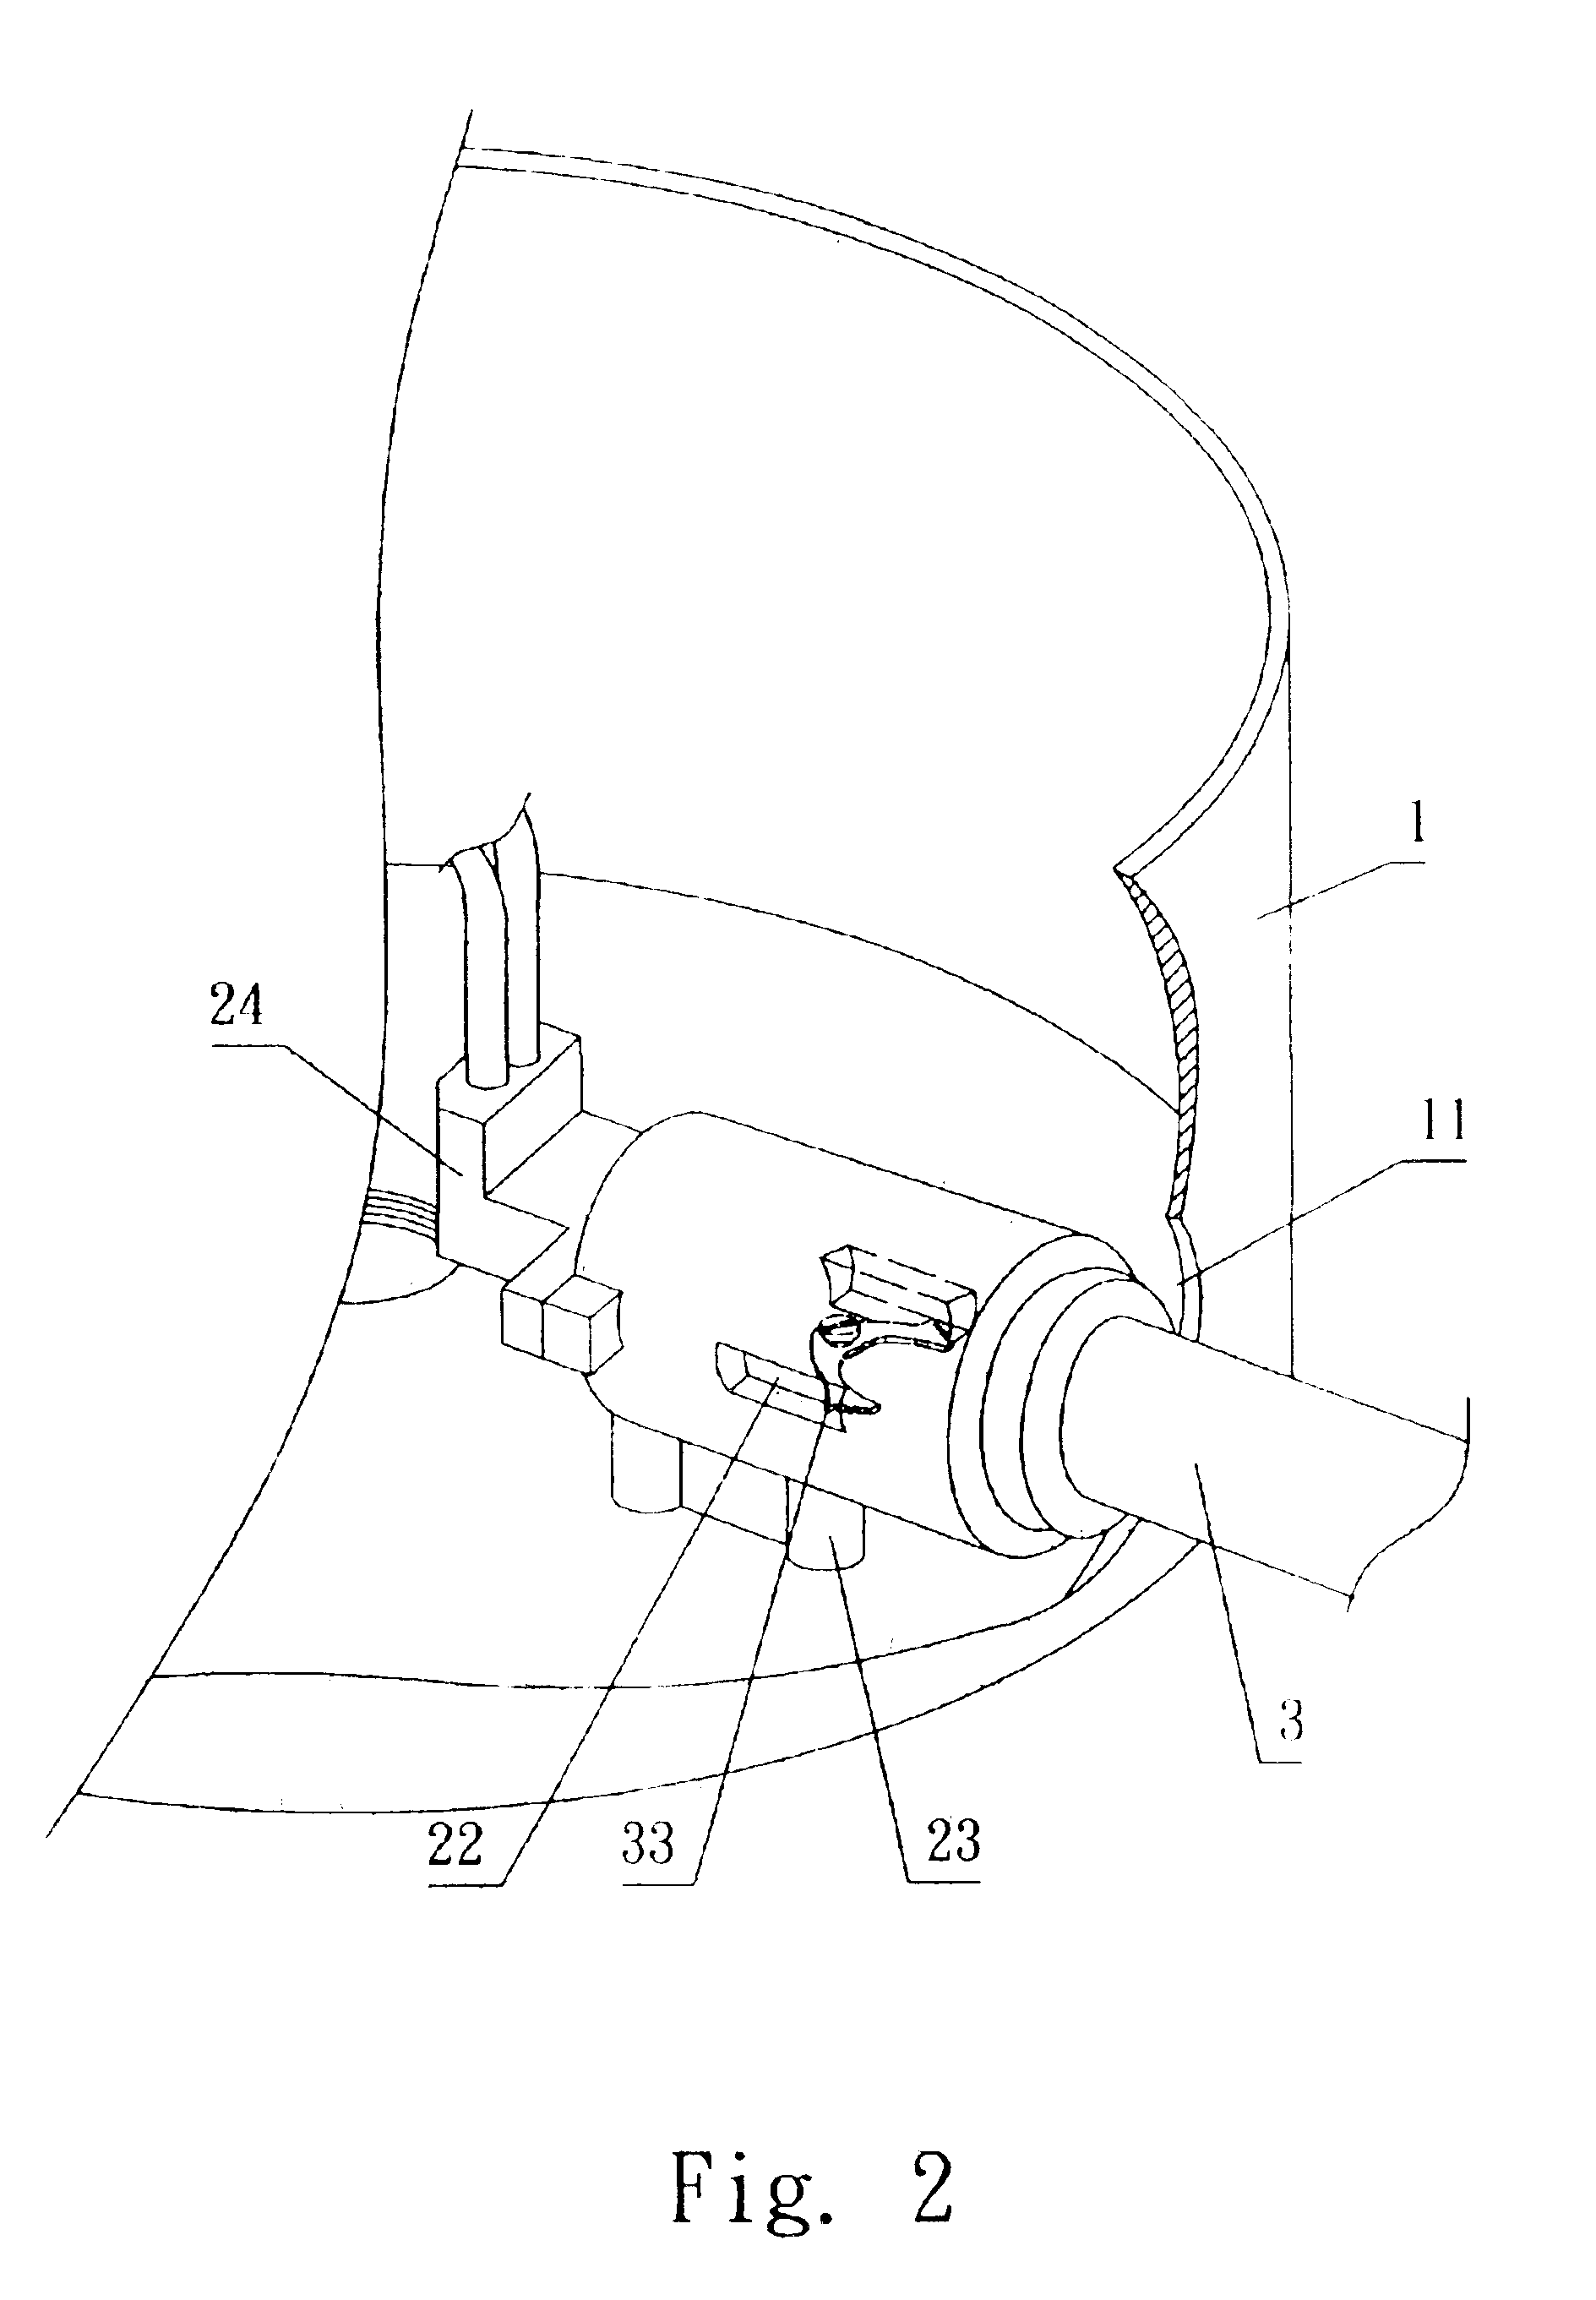 Detachable lamp assembly device